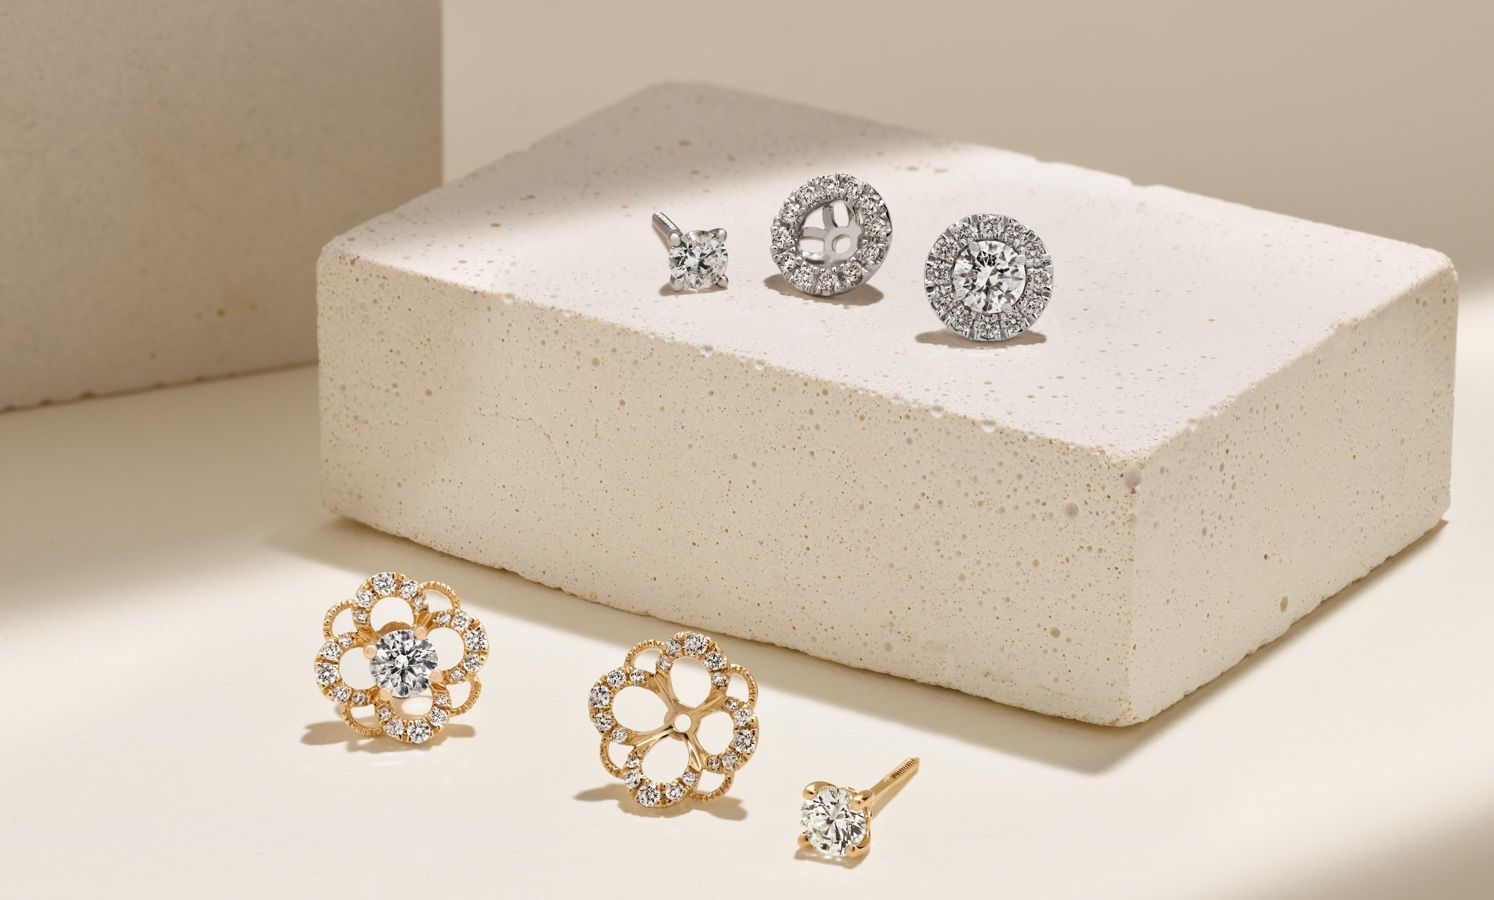 A collection of diamond studs and earring jackets